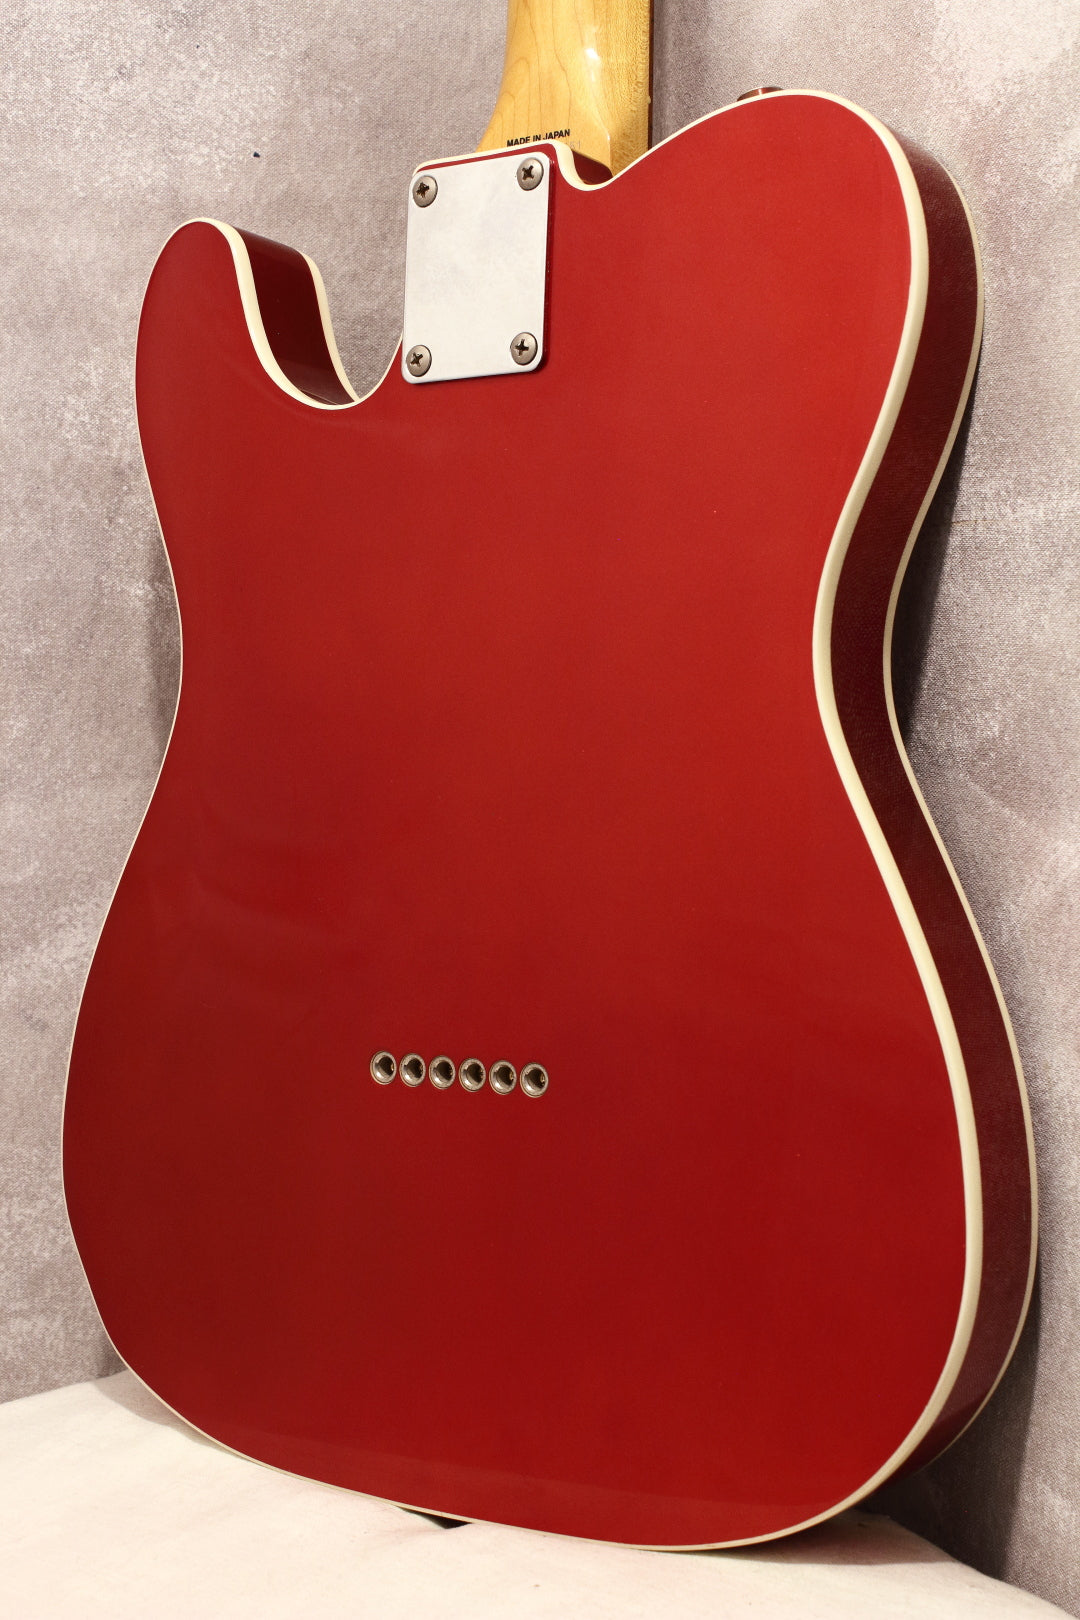 Fender Japan '62 Reissue Telecaster TL62B Bound Candy Apple Red 2012